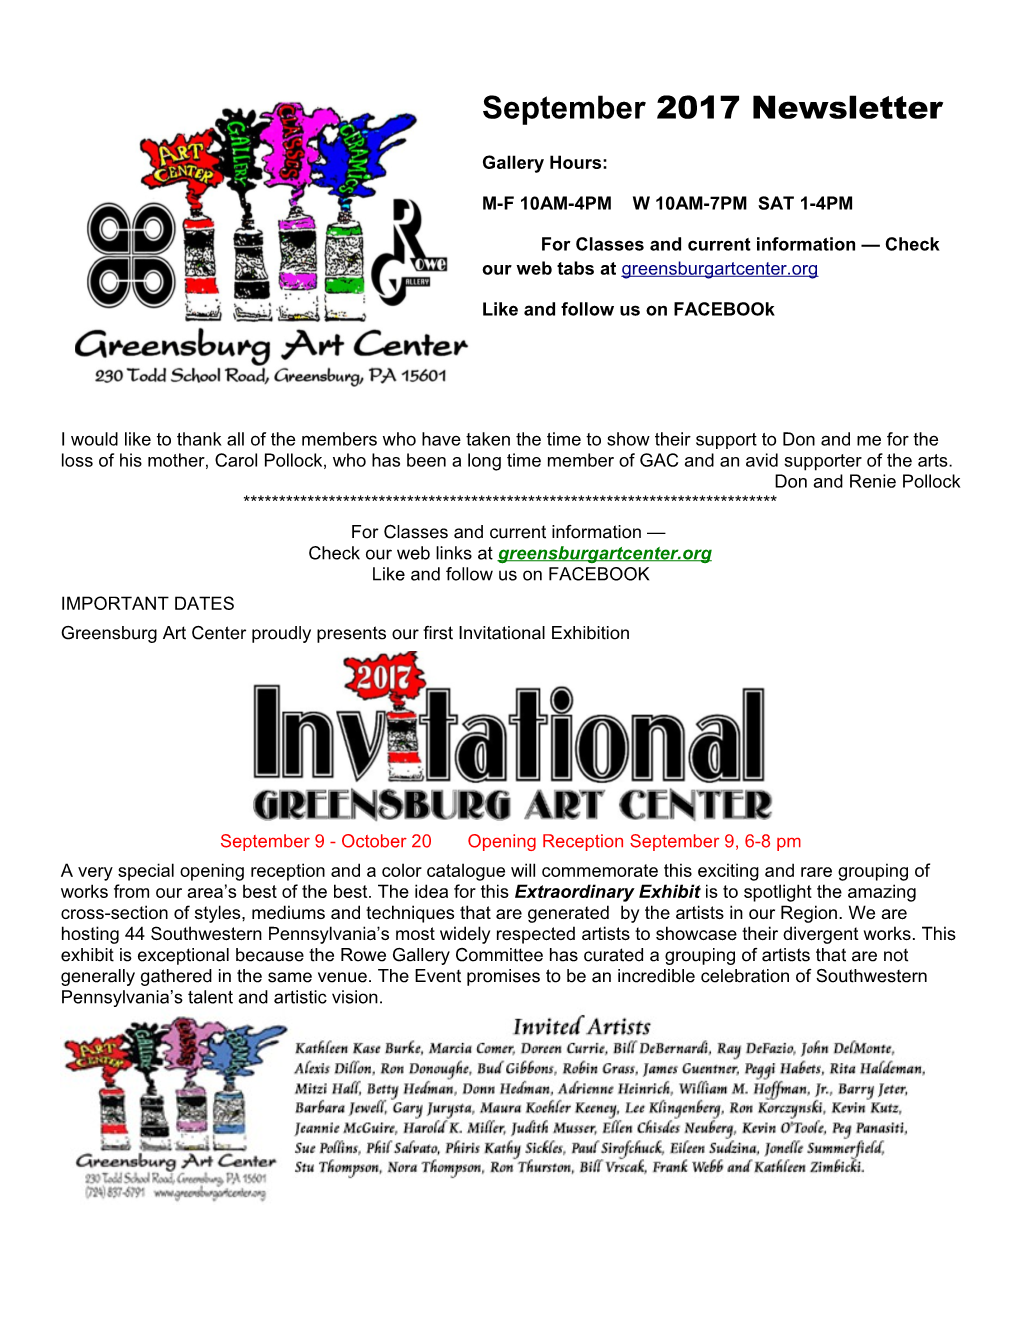 For Classes and Current Information Check Our Web Tabs at Greensburgartcenter.Org